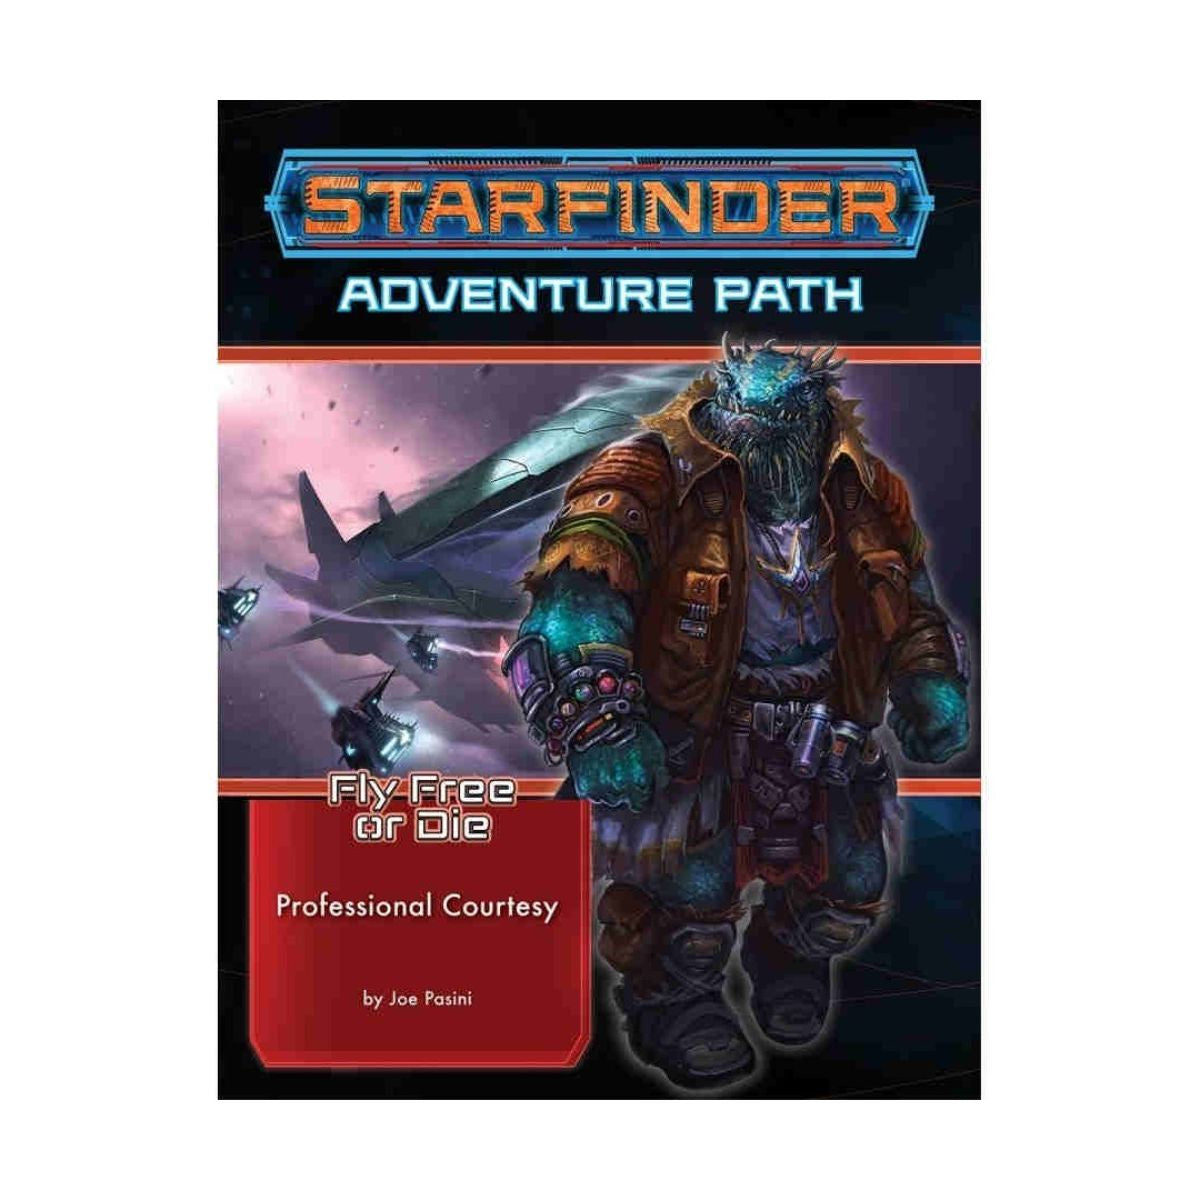 Starfinder Adventure Path - Fly Free or Die #3 - Professional Courtesy